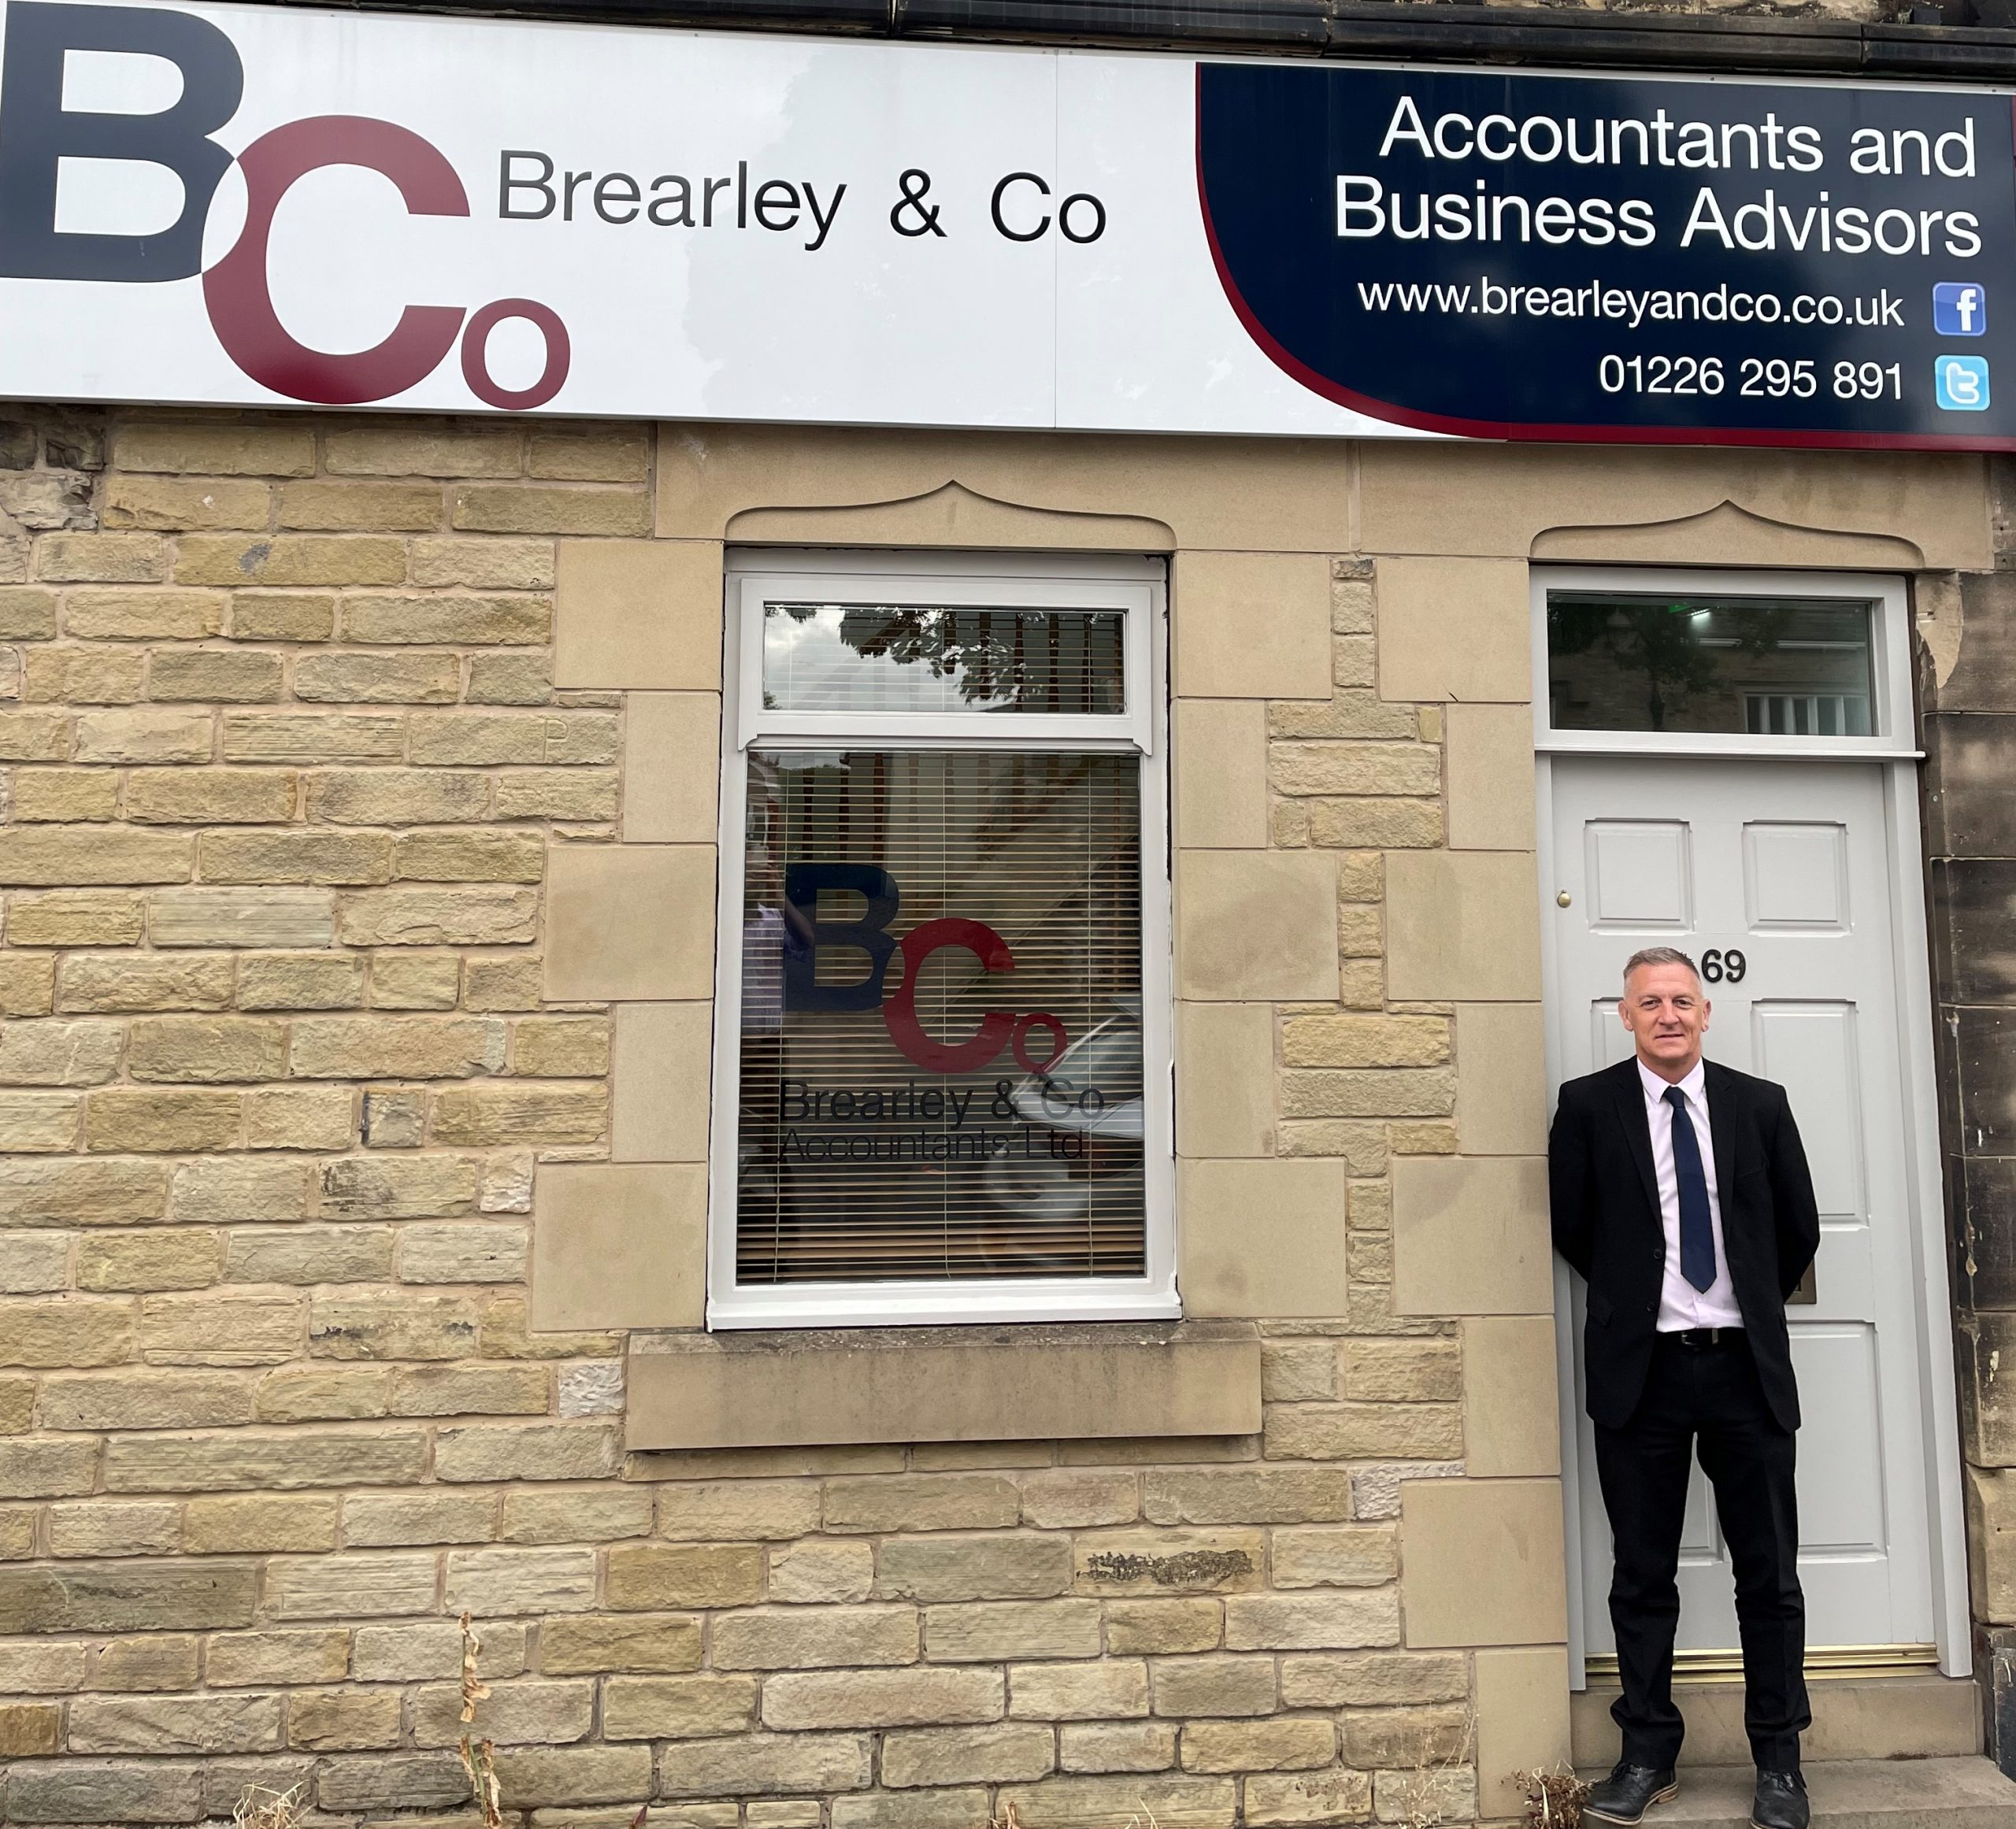 Brearley & Co complete the acquisition of Hart Moss Doyle